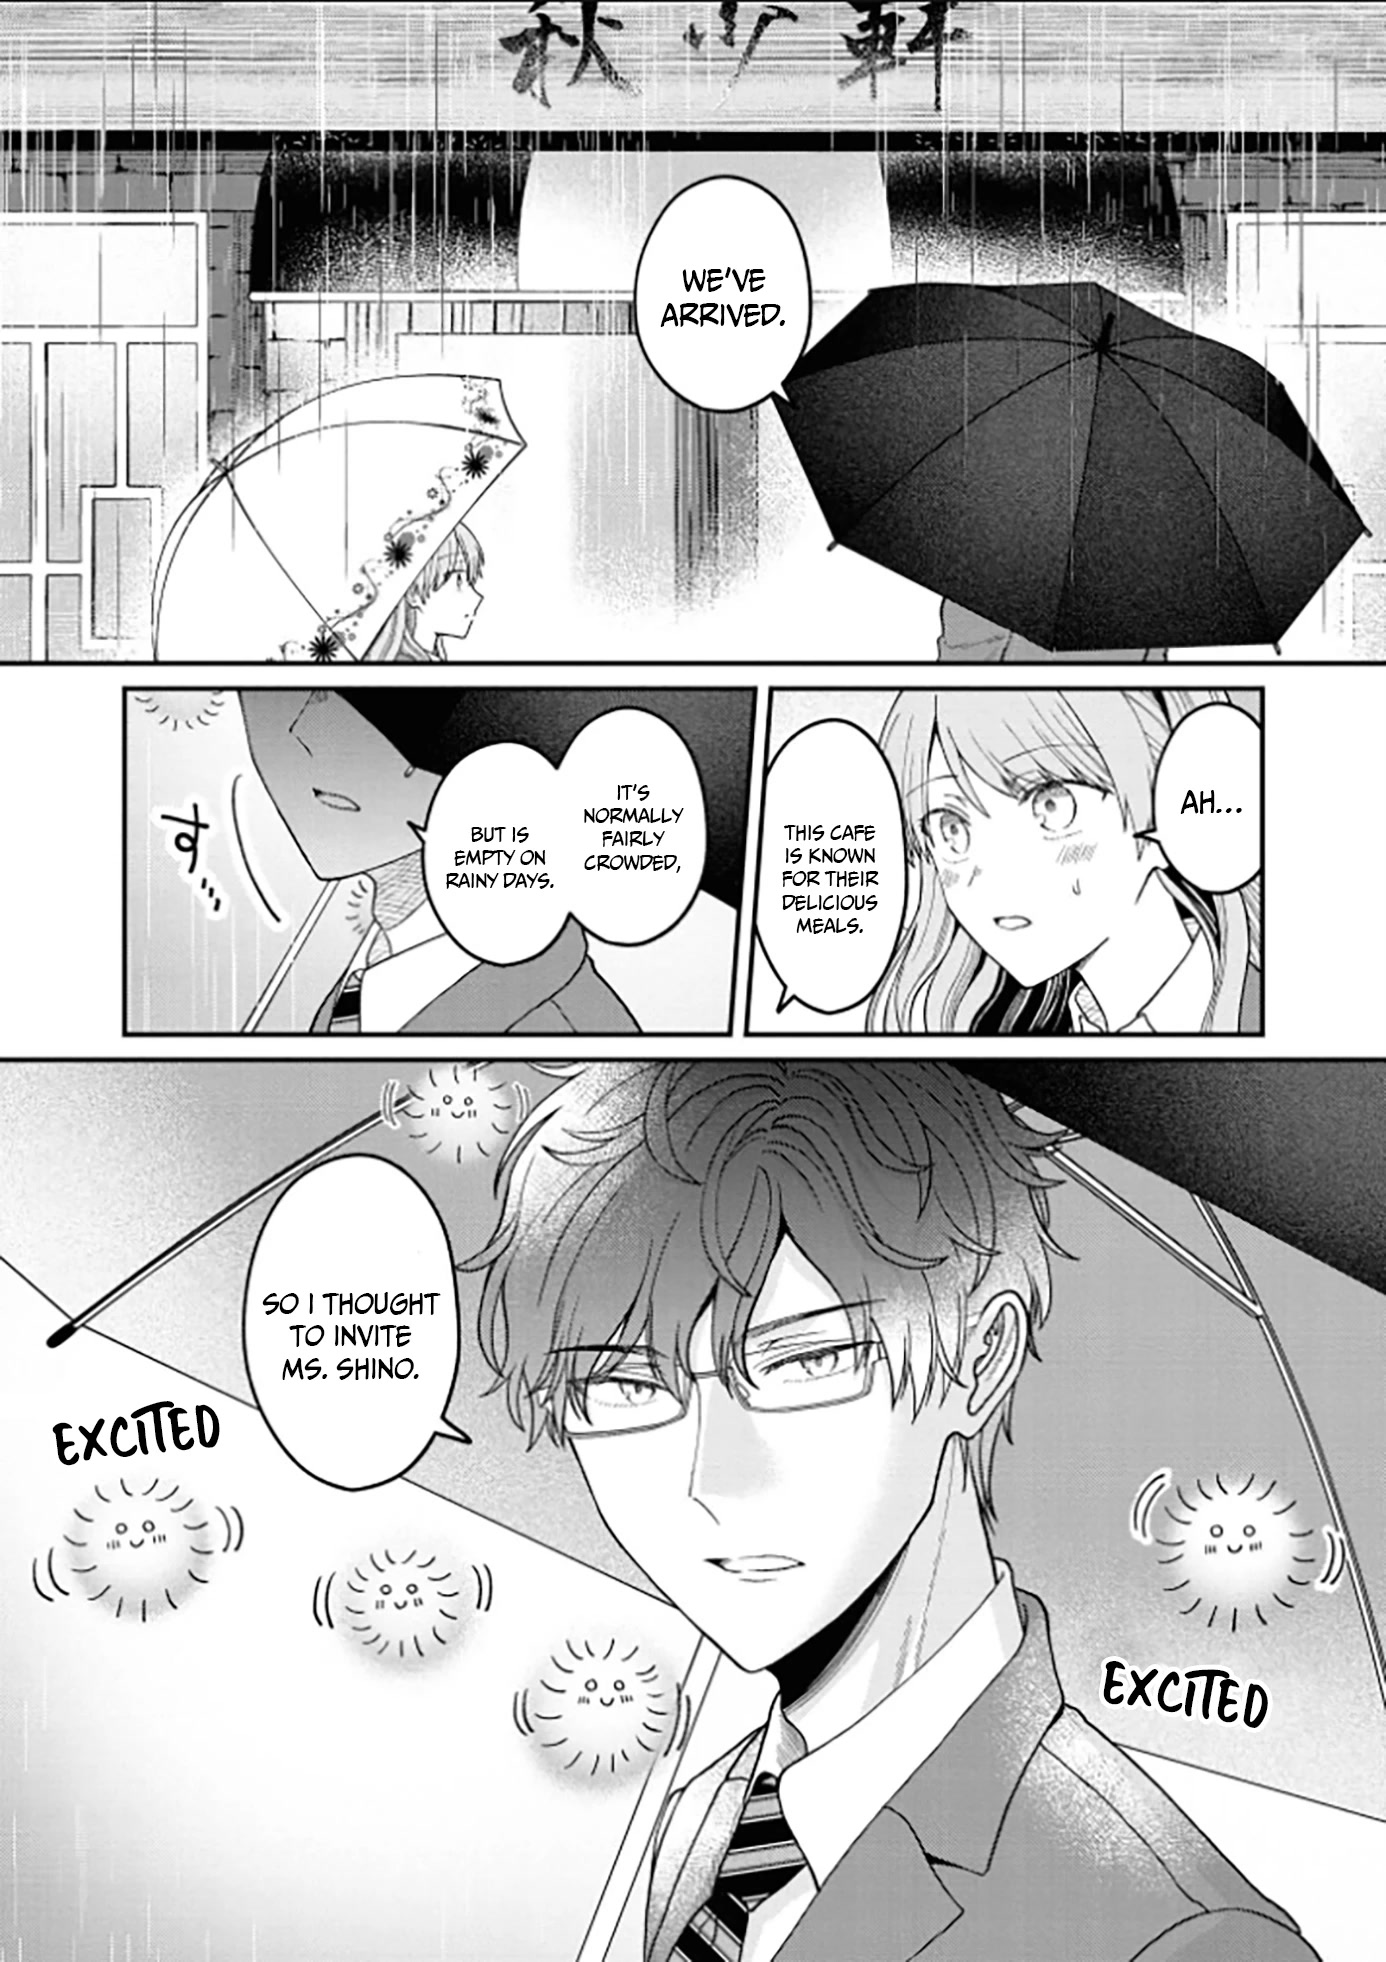 The New-Hire Who Could "Read" Emotions and the Unsociable Senpai - chapter 5 - #3